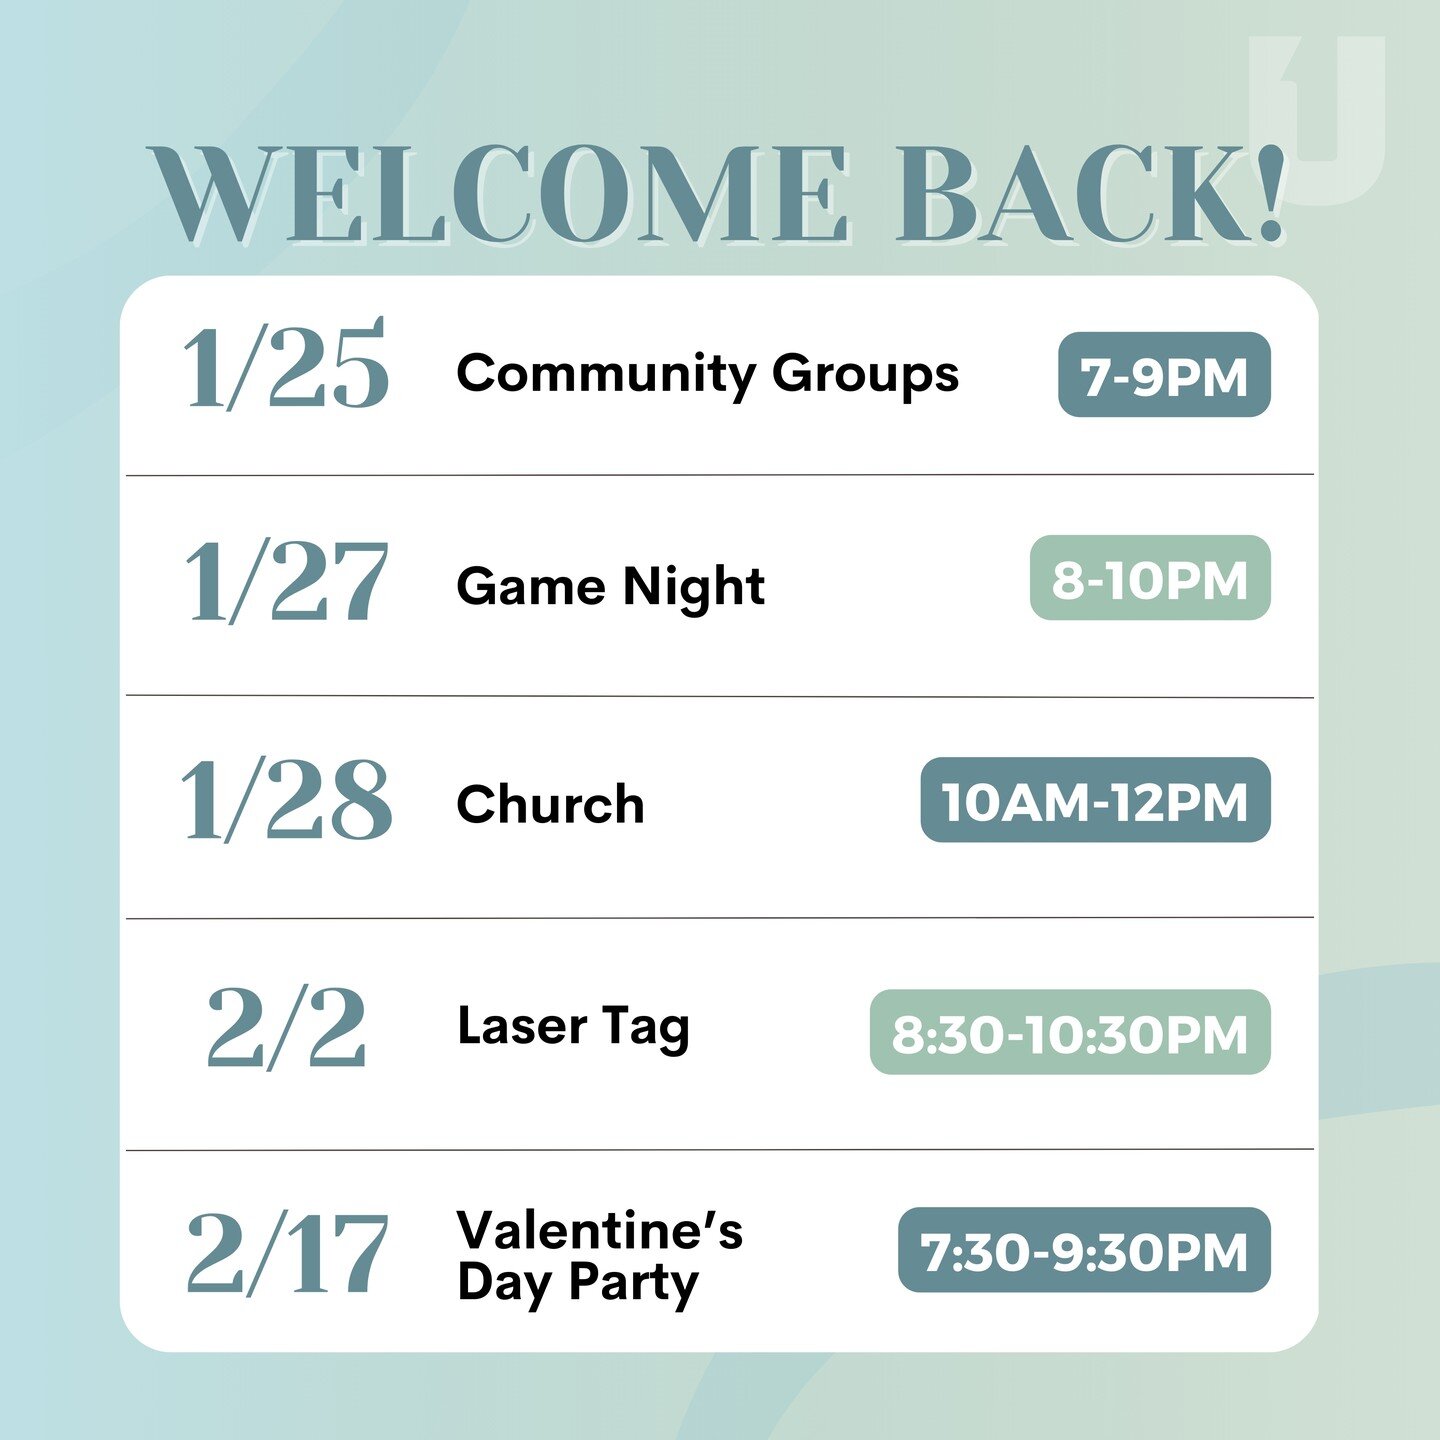 WELCOME BACK ONEU!! 
____

We are so excited for the first events of 2024! We are kicking things off with Community Groups (at Stamp) in a few days! Make sure to come! :)